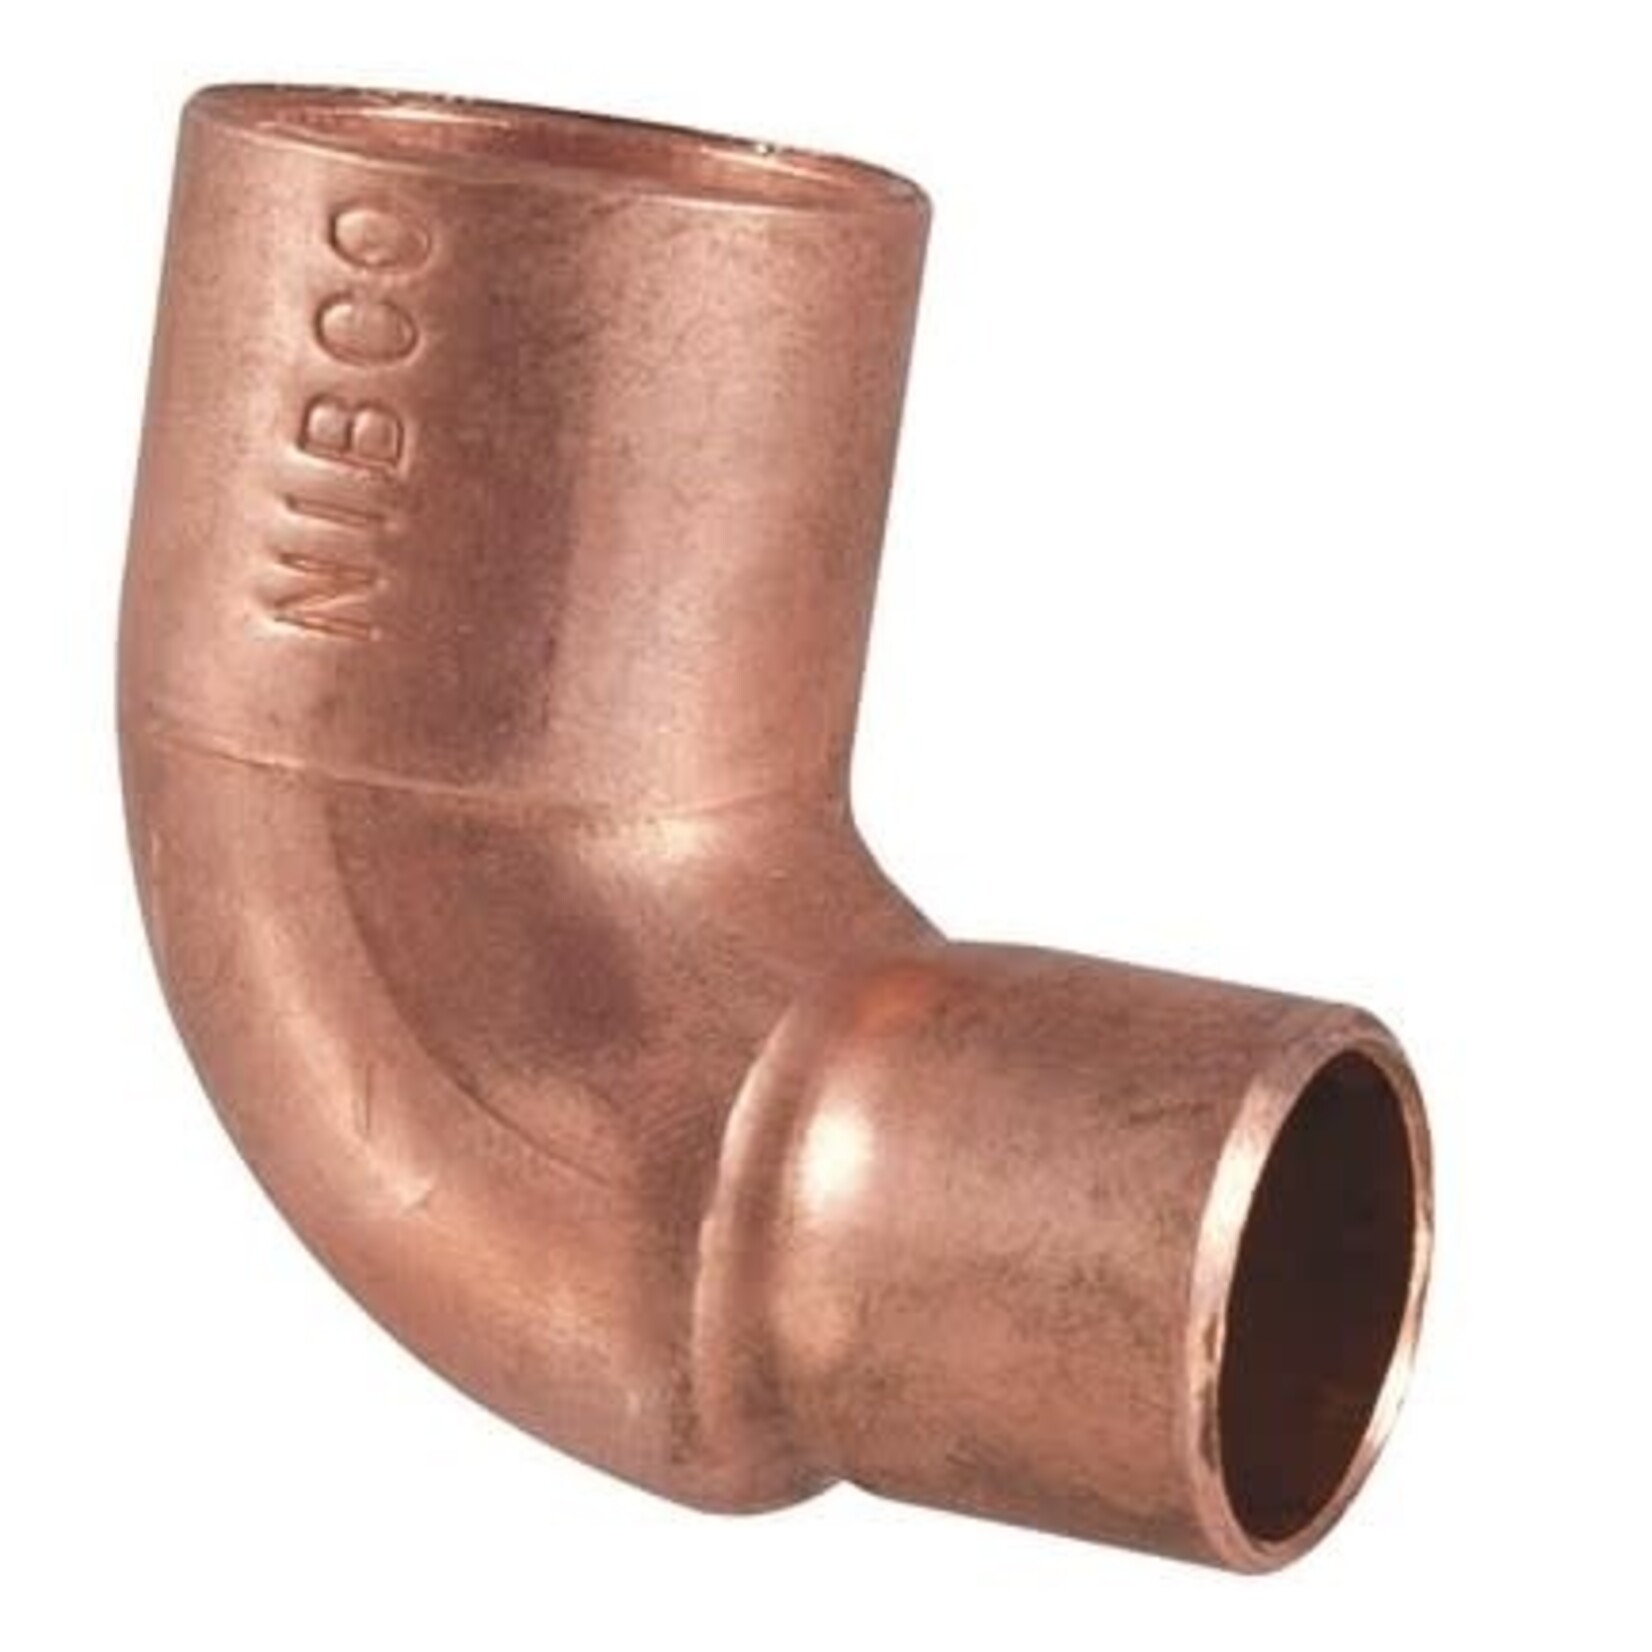 EVERBILT 3/4 IN X 1/2 IN WROT COPPER 90 DEGREE ELBOW